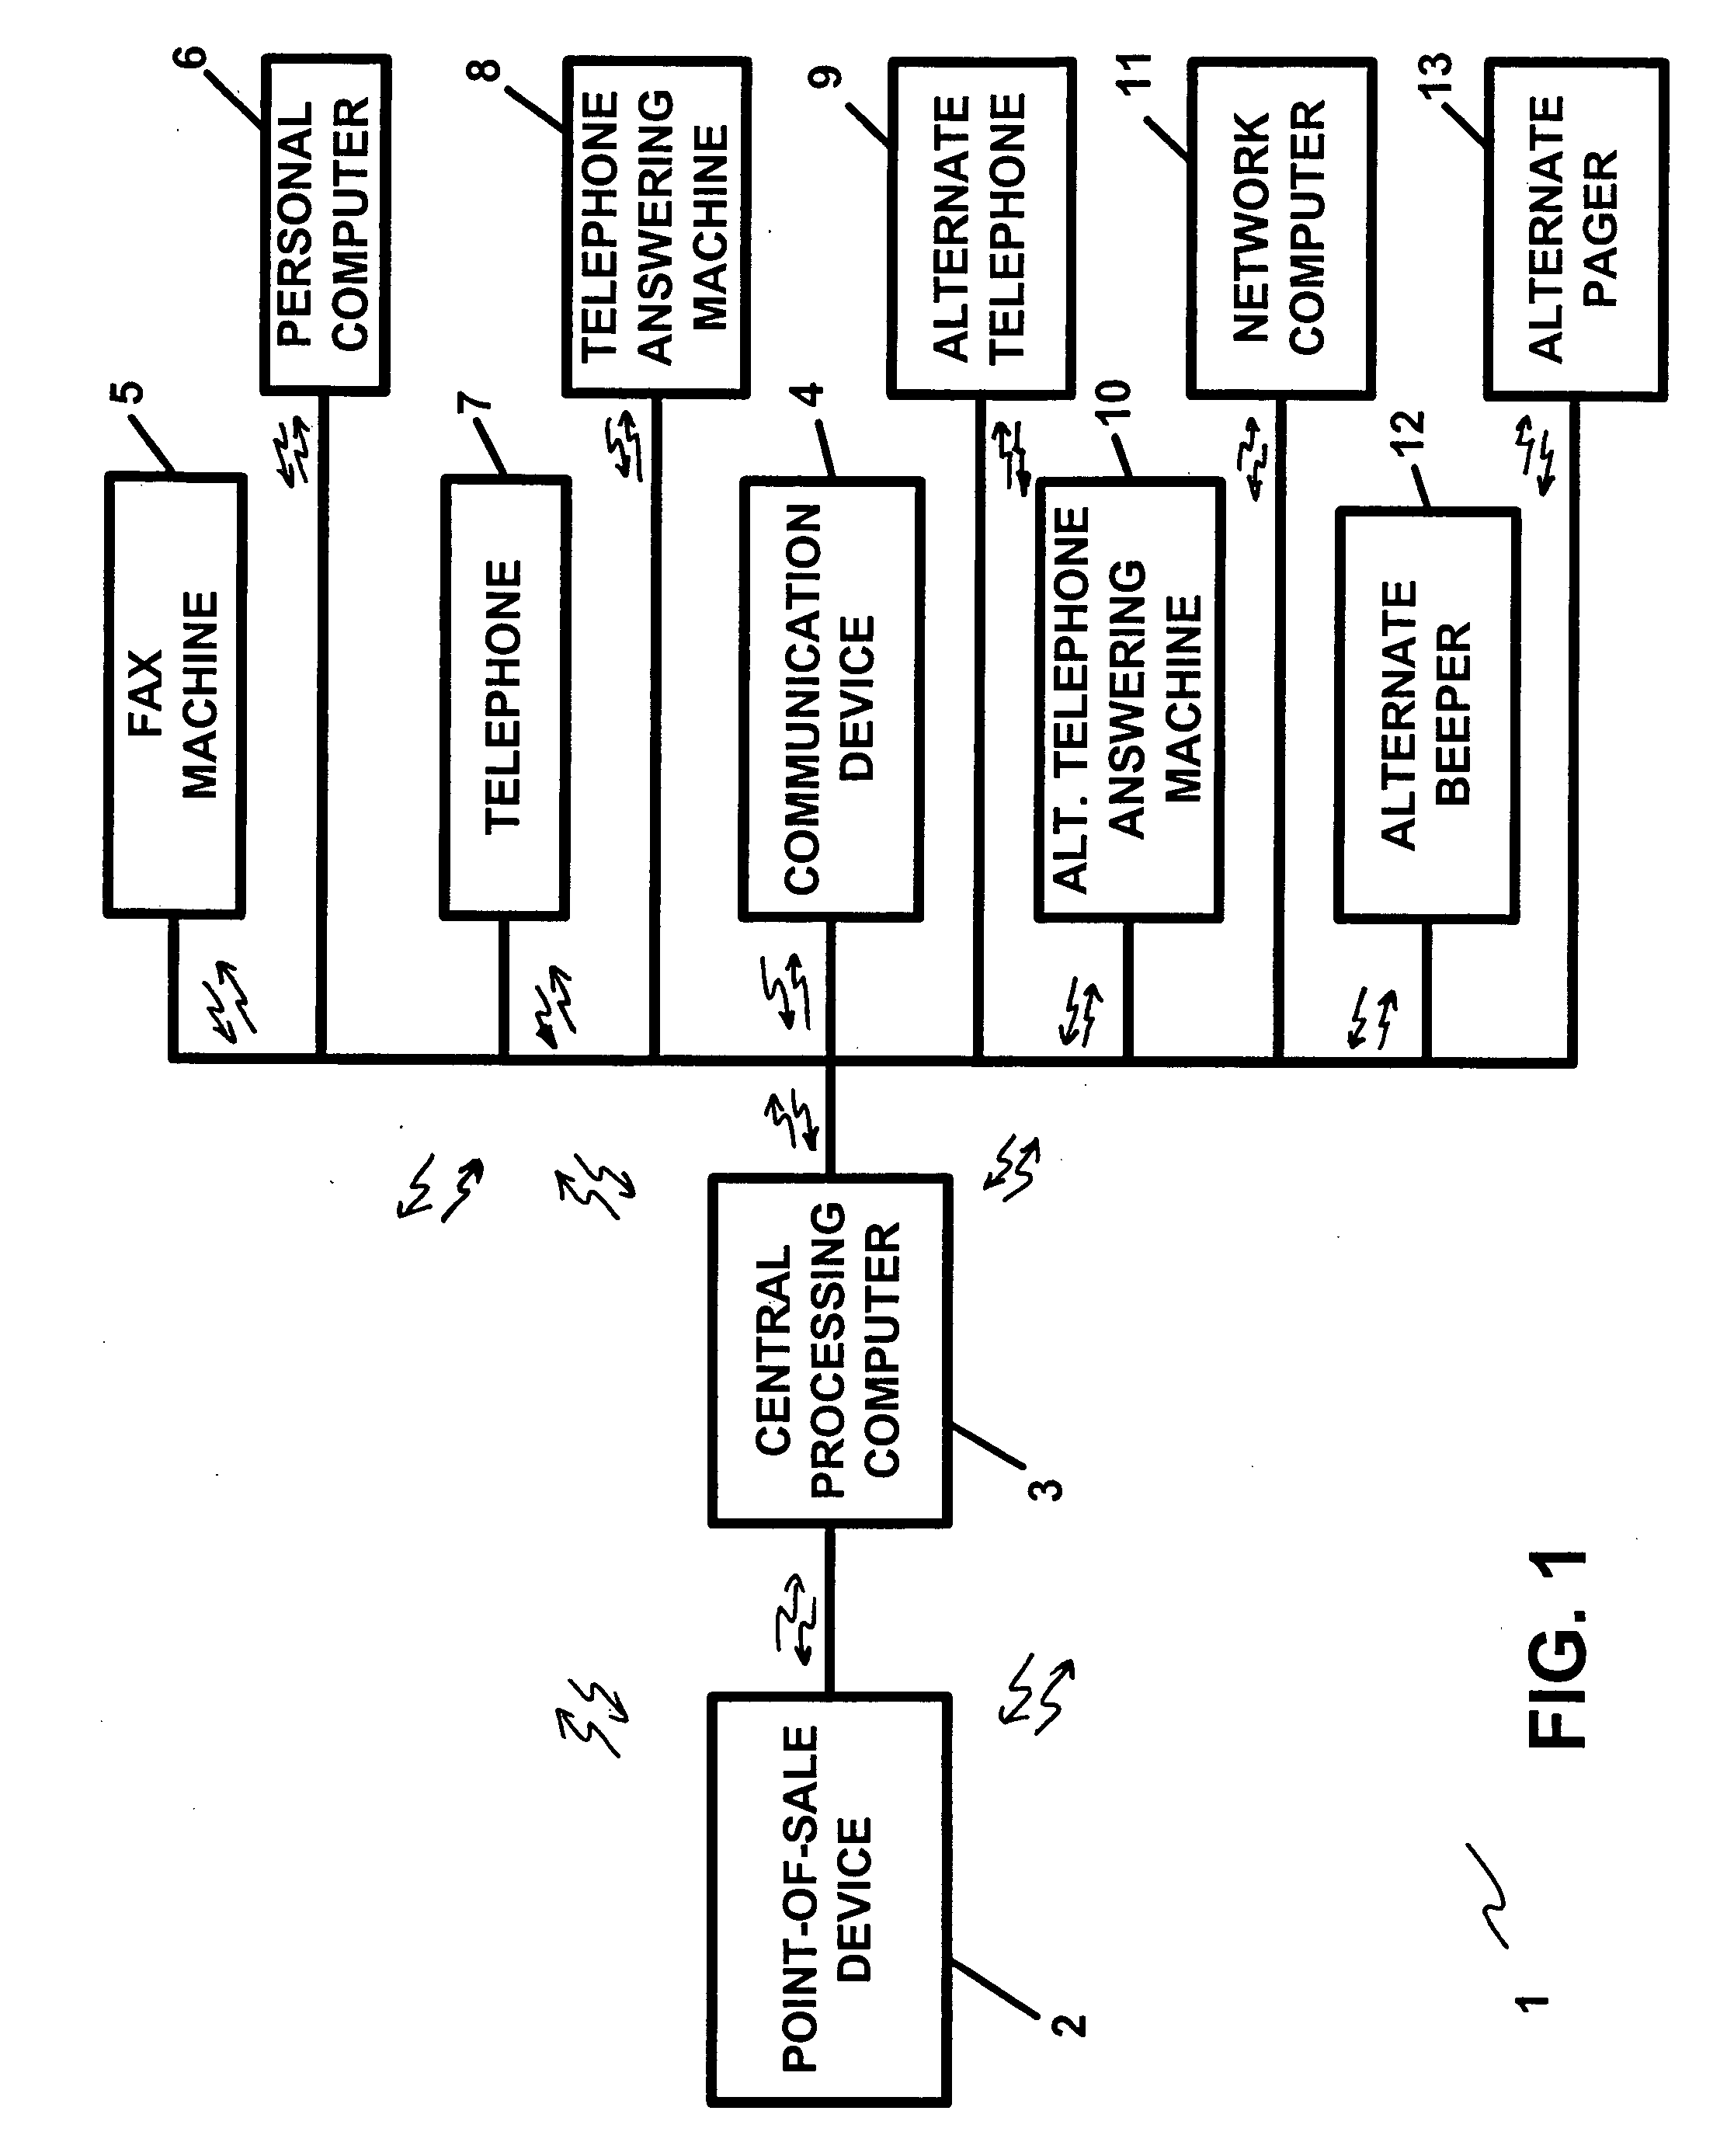 Apparatus and method for providing account security